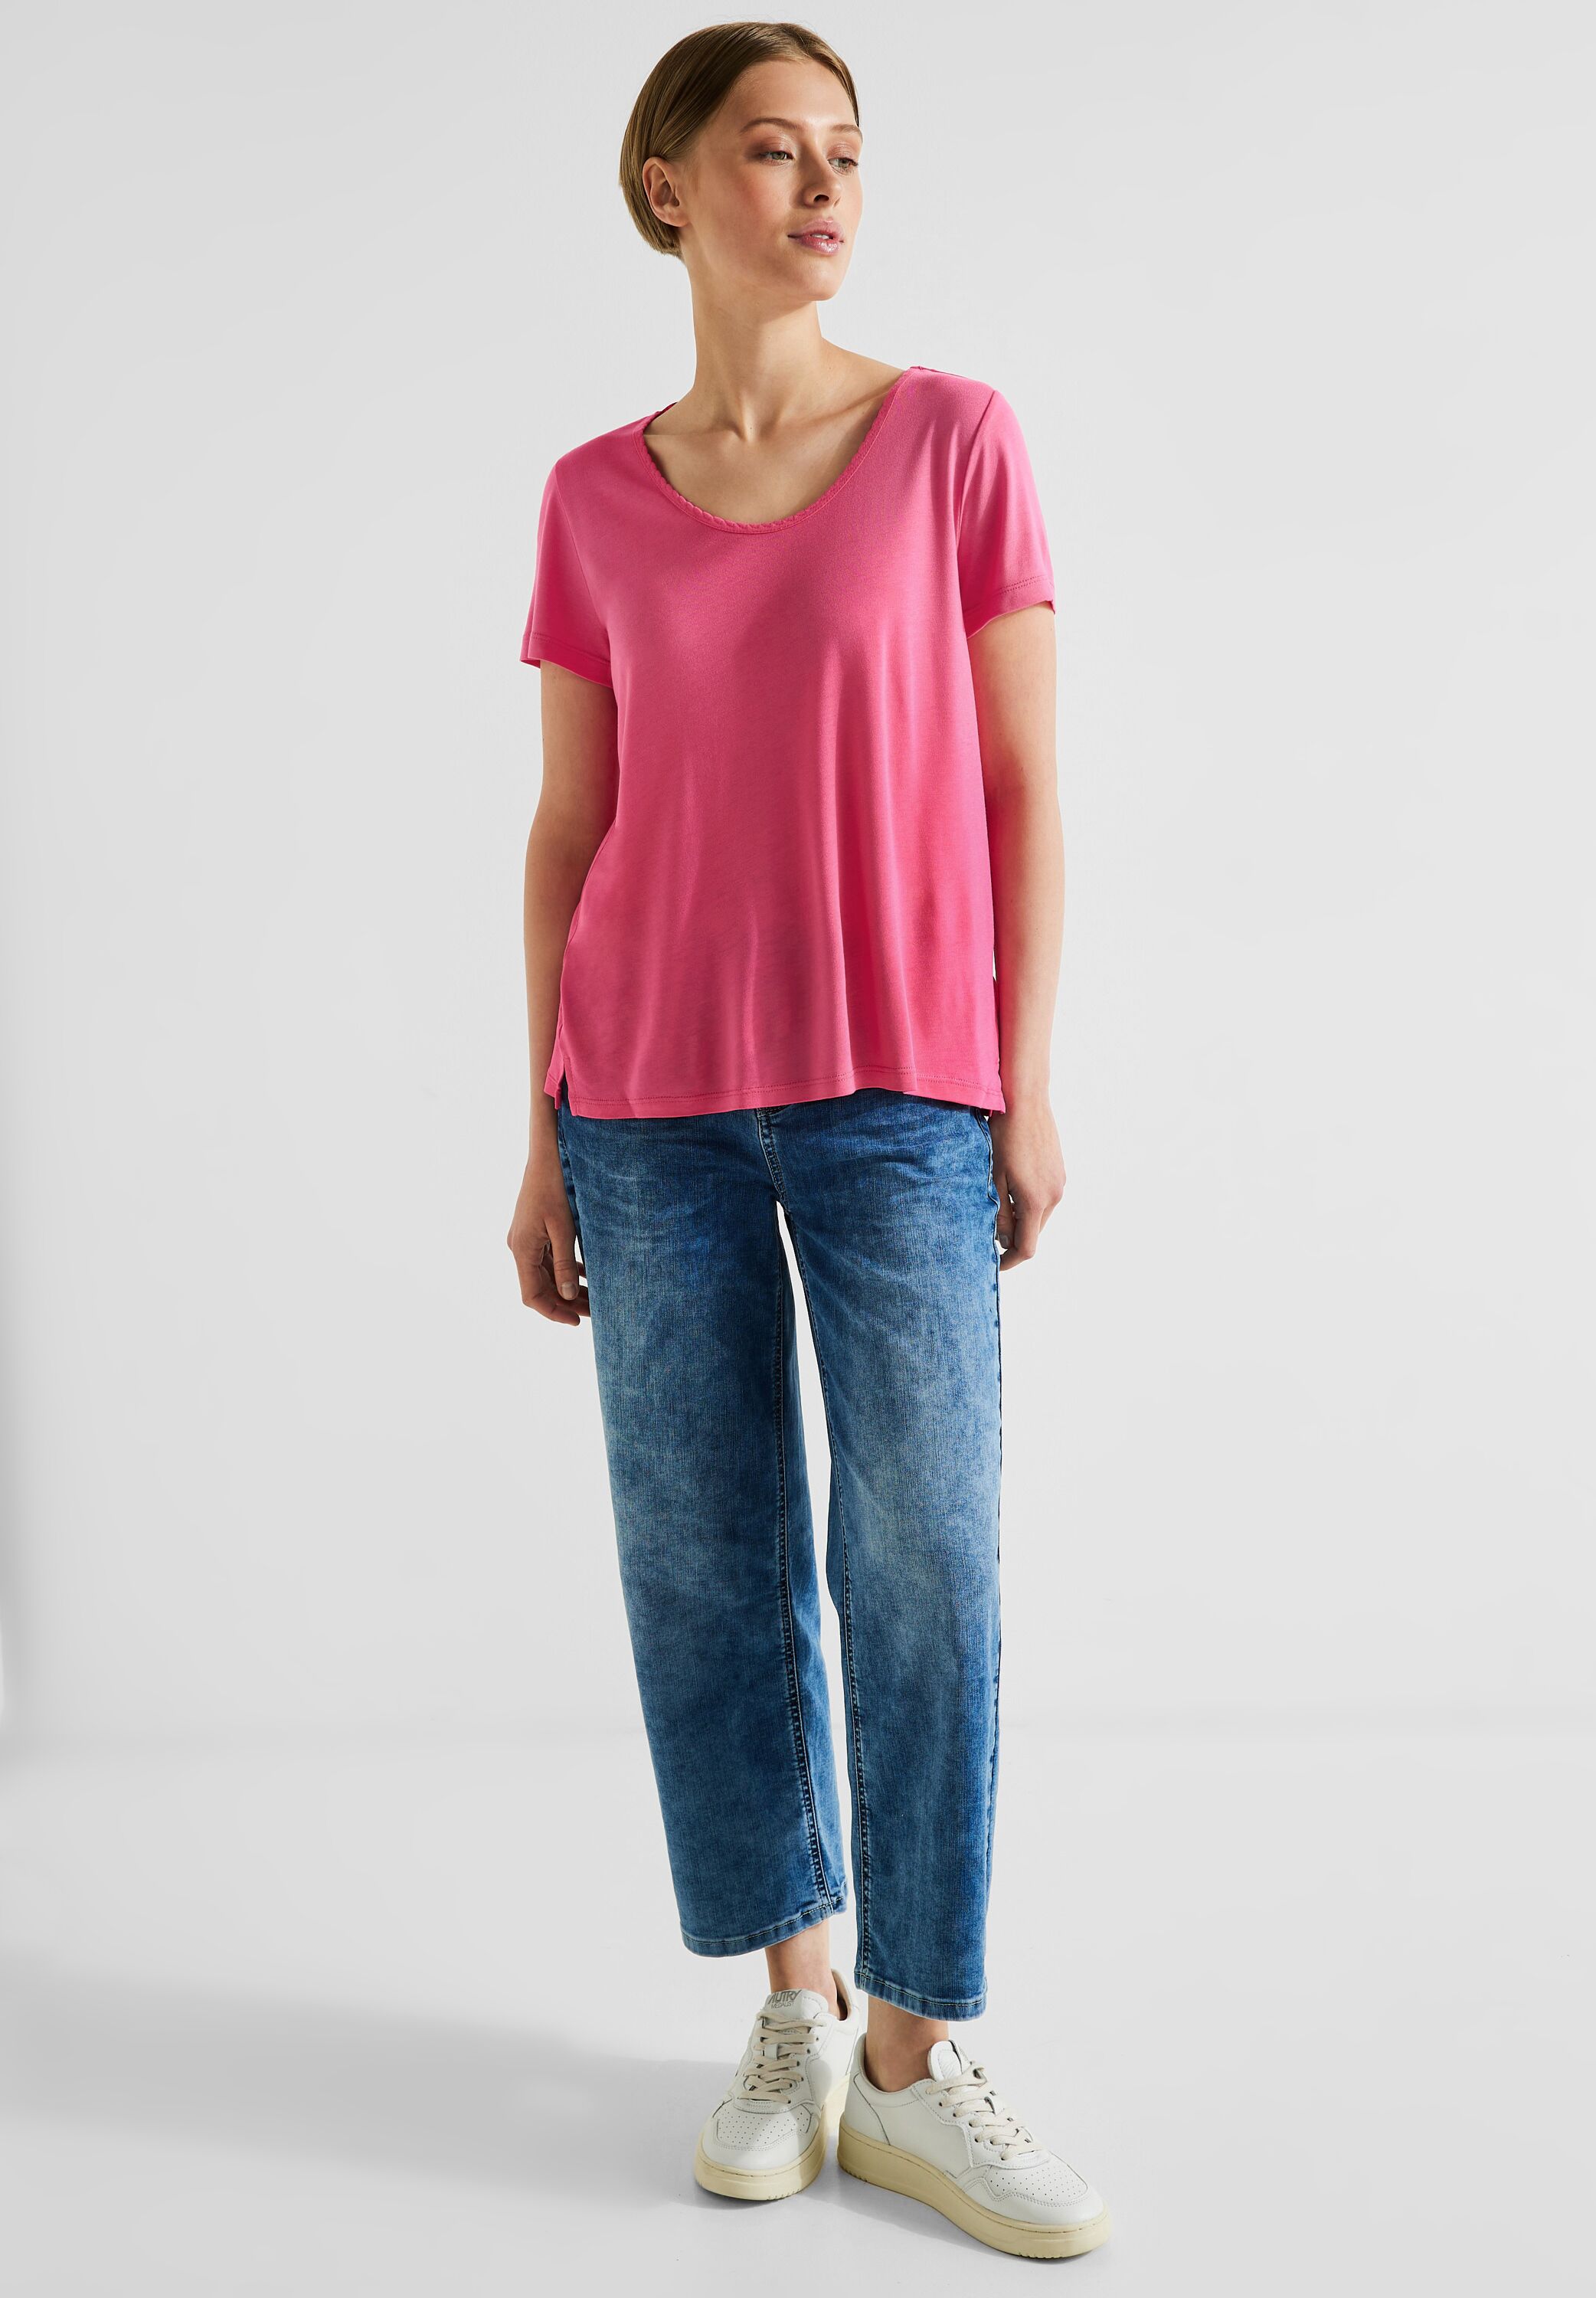 Mode in im A320124-14647 CONCEPT - One SALE Street Rose Berry reduziert T-Shirt